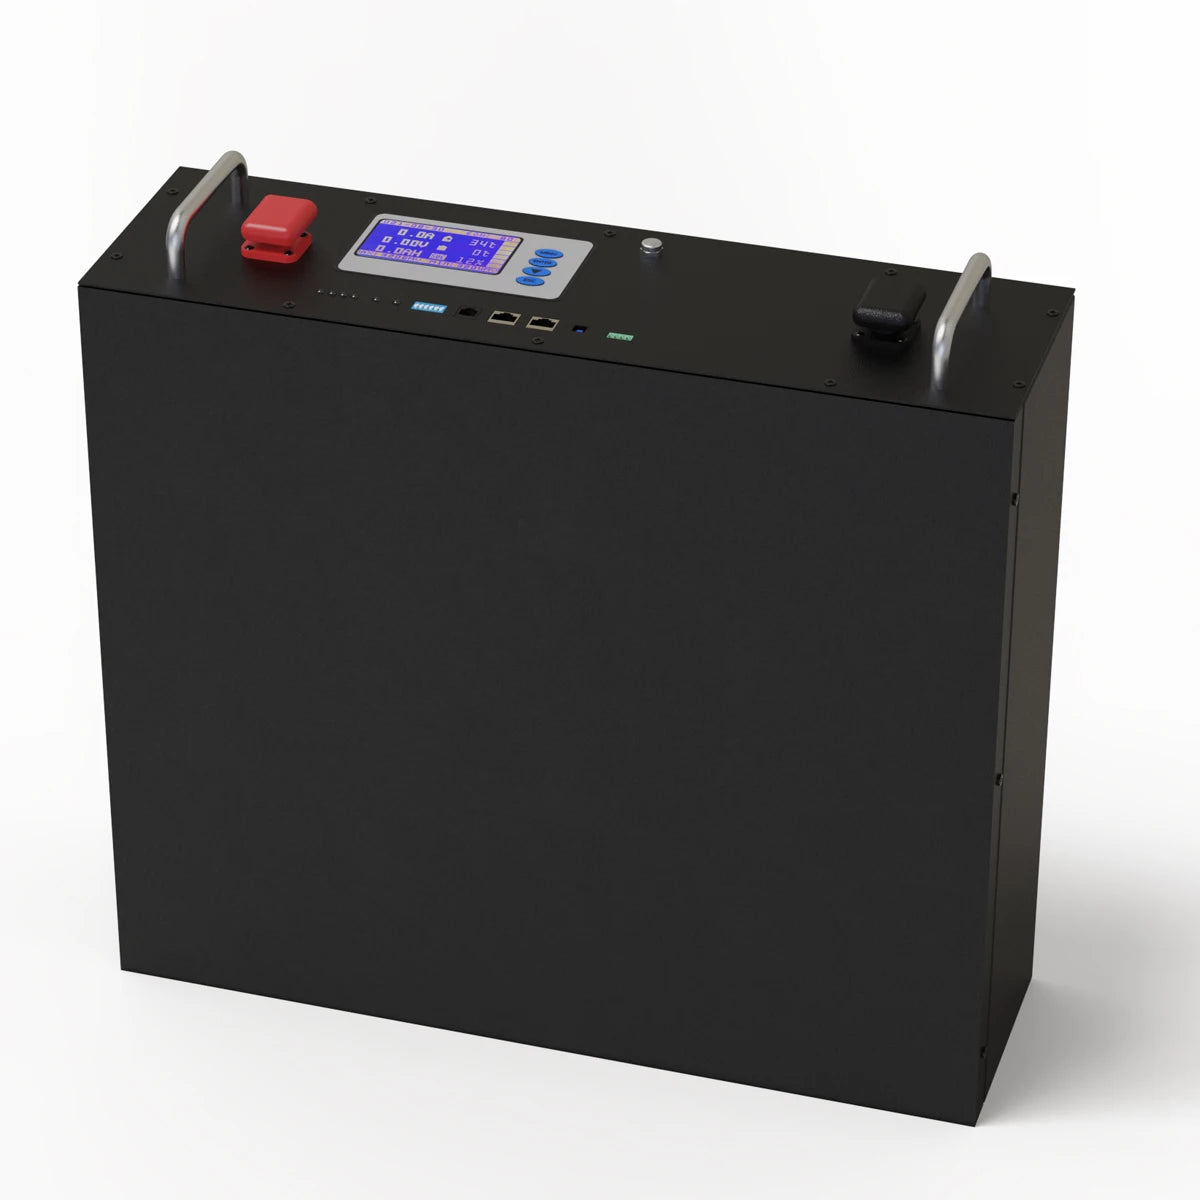 48V 200AH 10KW LiFePO4 Battery, High-capacity LiFePO4 battery pack for solar power systems with communication features.